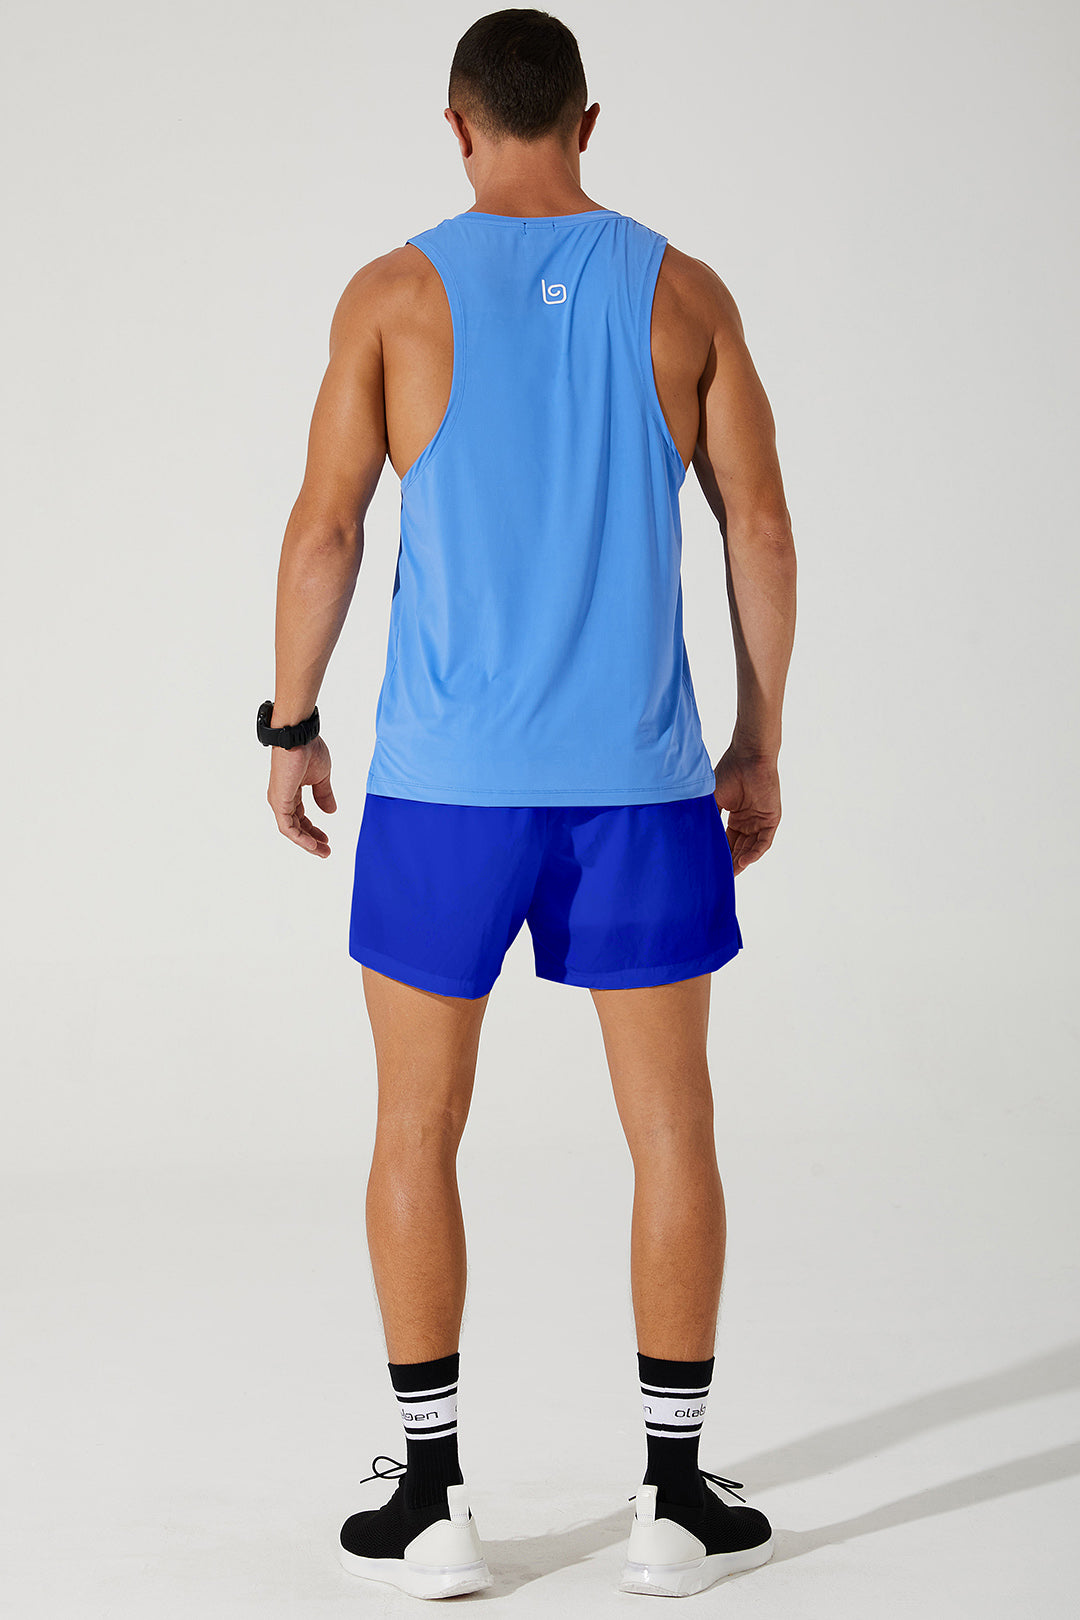 Blue men's tank top by Ricard Tank, style OW-0027-MTT-BL-2, perfect for a casual look.